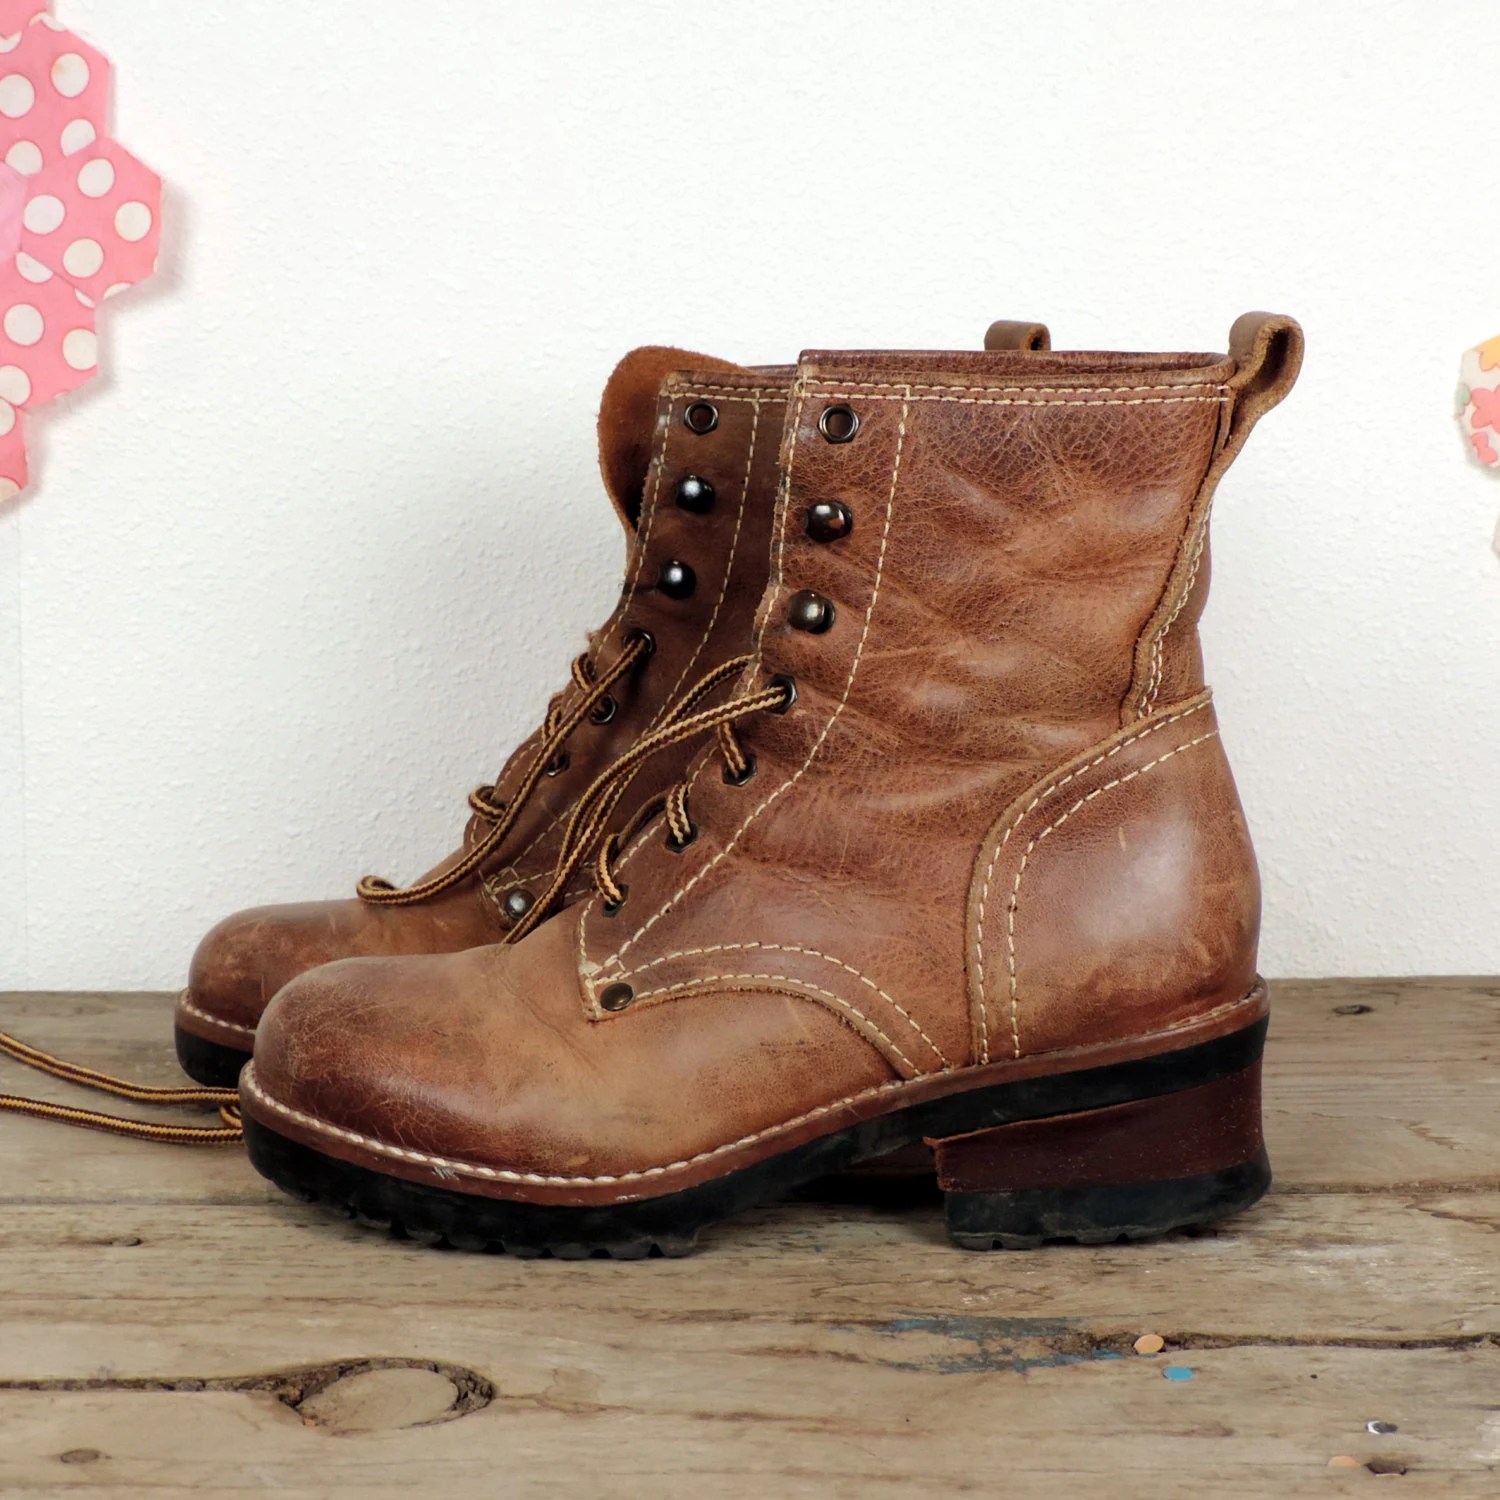 Vintage Distressed Mia Boots/ 90s Brown Leather Heeled Lace Up Boots ...